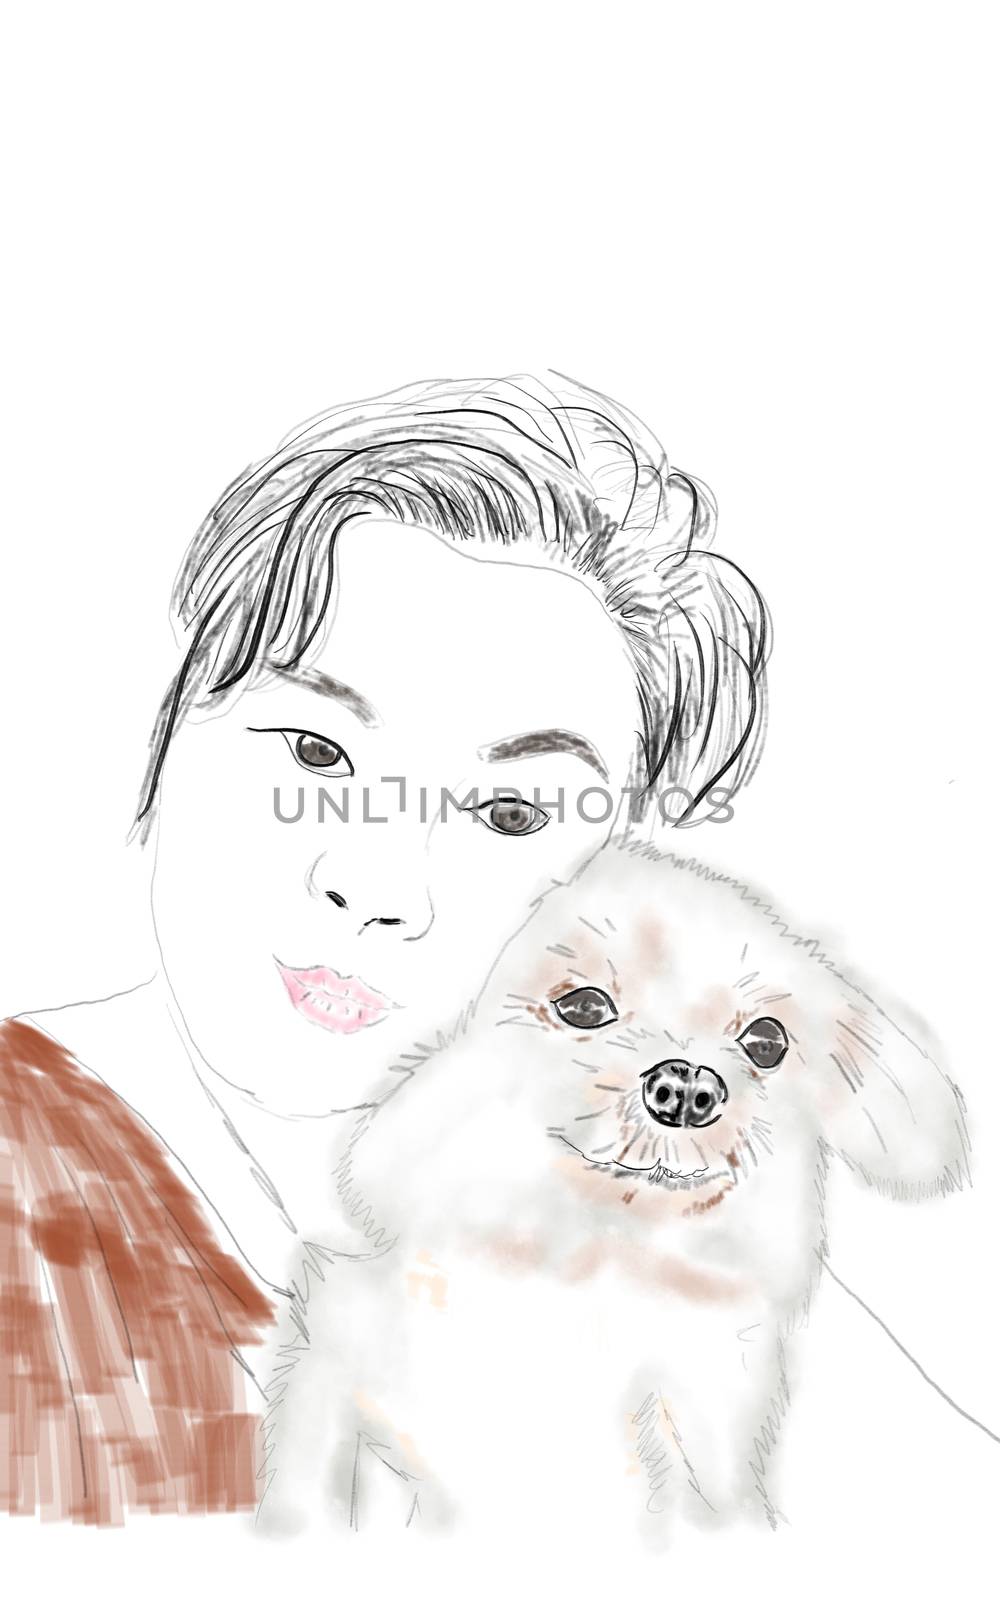 Sketch and drawn with painted simple digital graphic illustration design of Women hugging her pet is a dog so cute